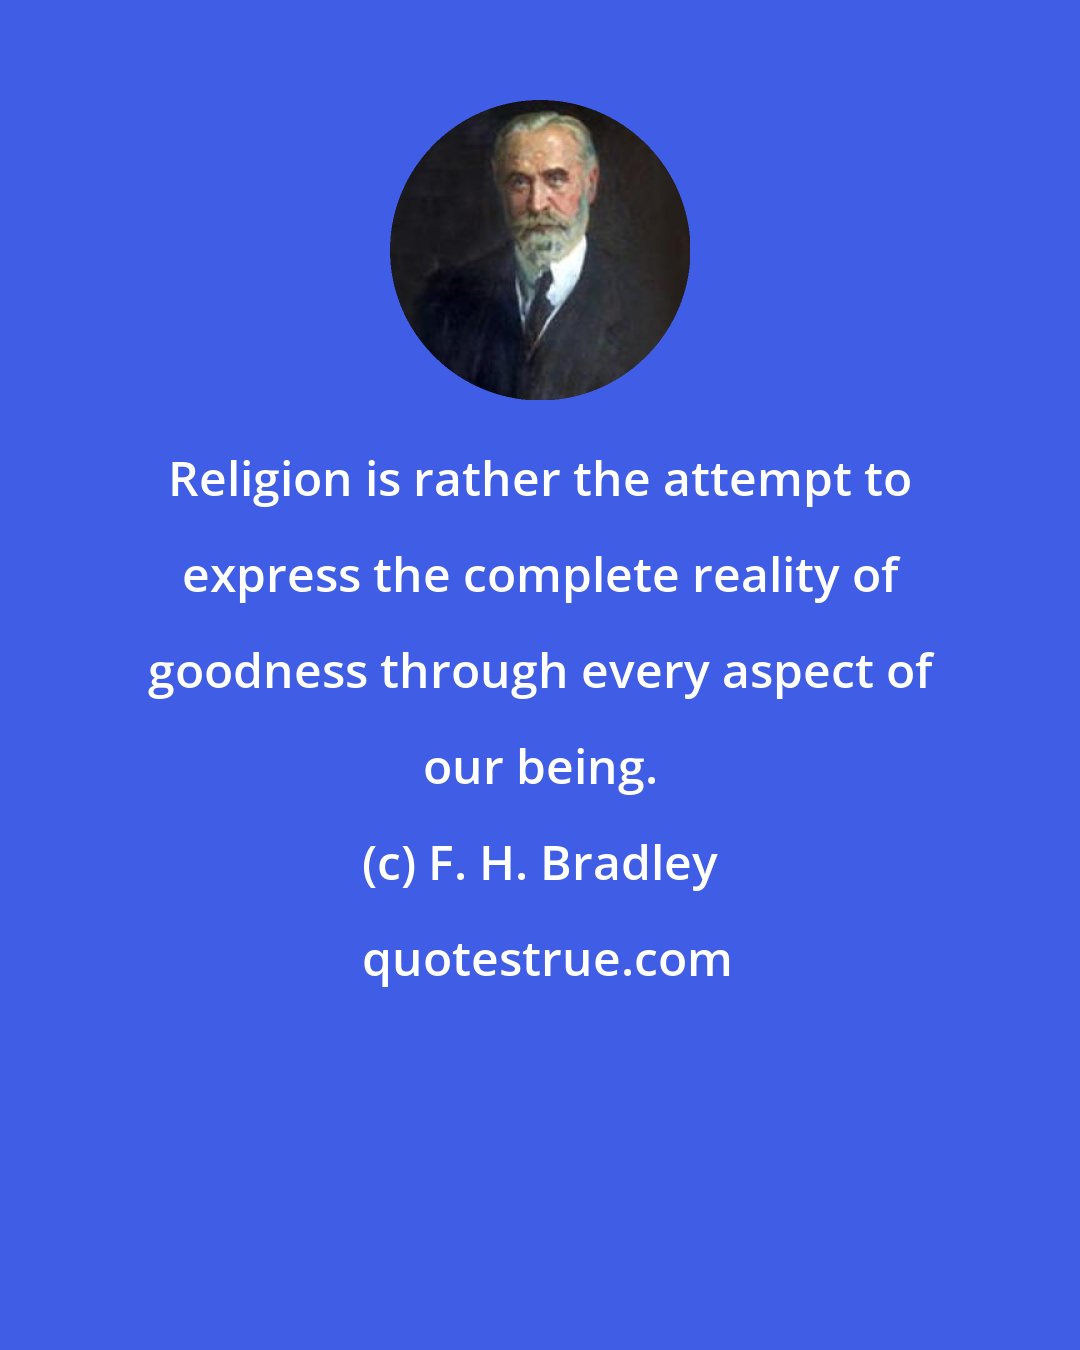 F. H. Bradley: Religion is rather the attempt to express the complete reality of goodness through every aspect of our being.